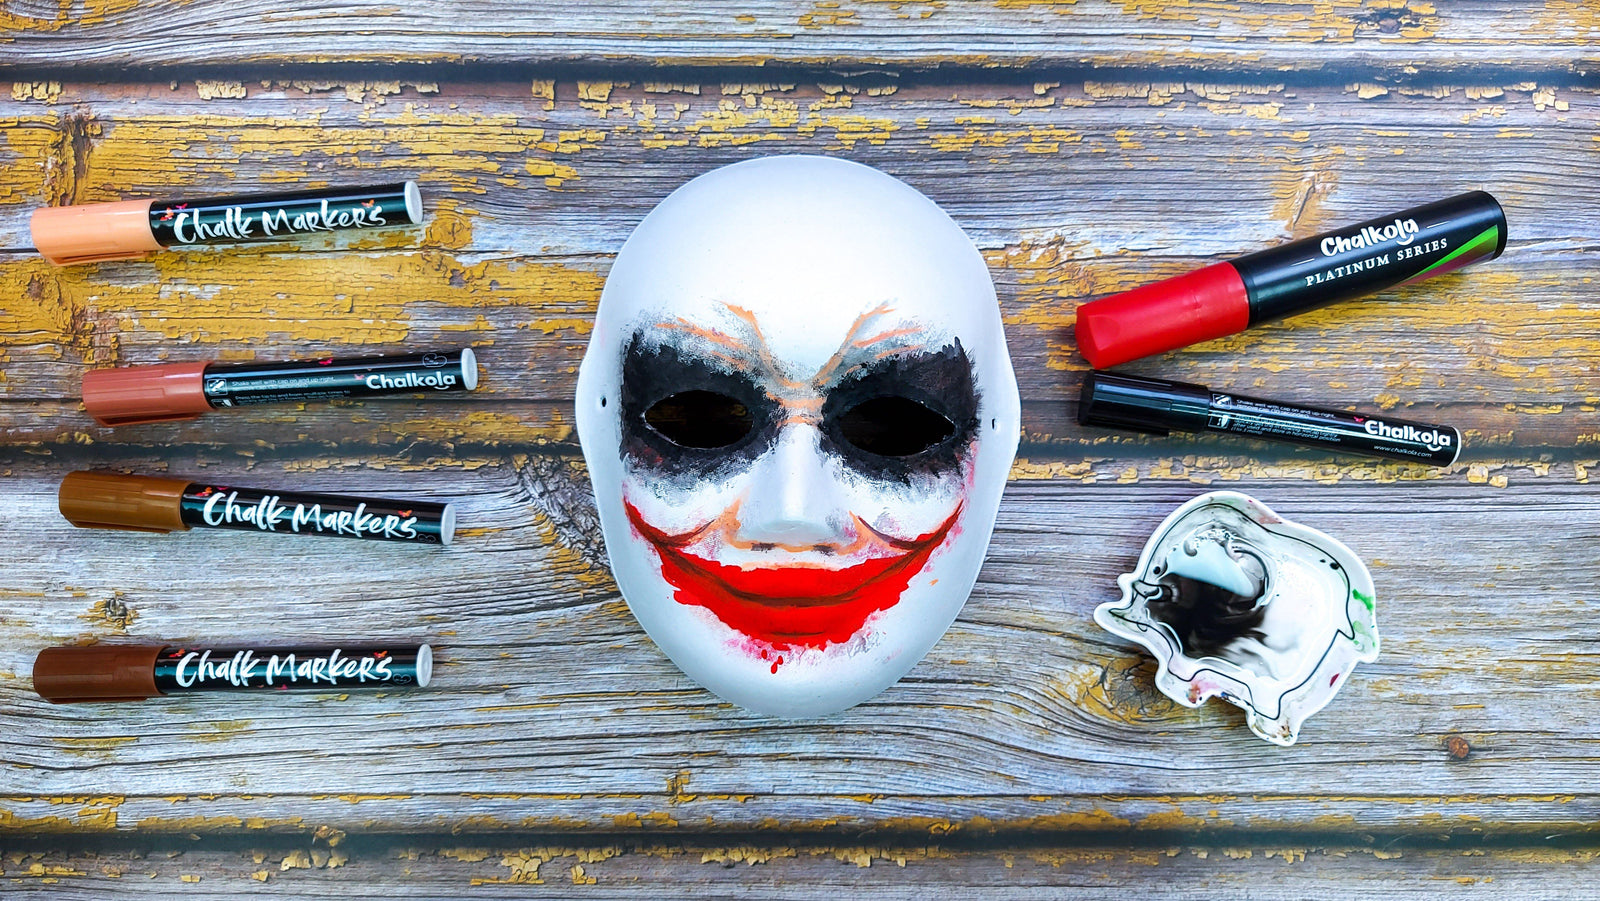 Incredible Compilation of Joker Mask Images – Extensive Collection in Stunning 4K Quality